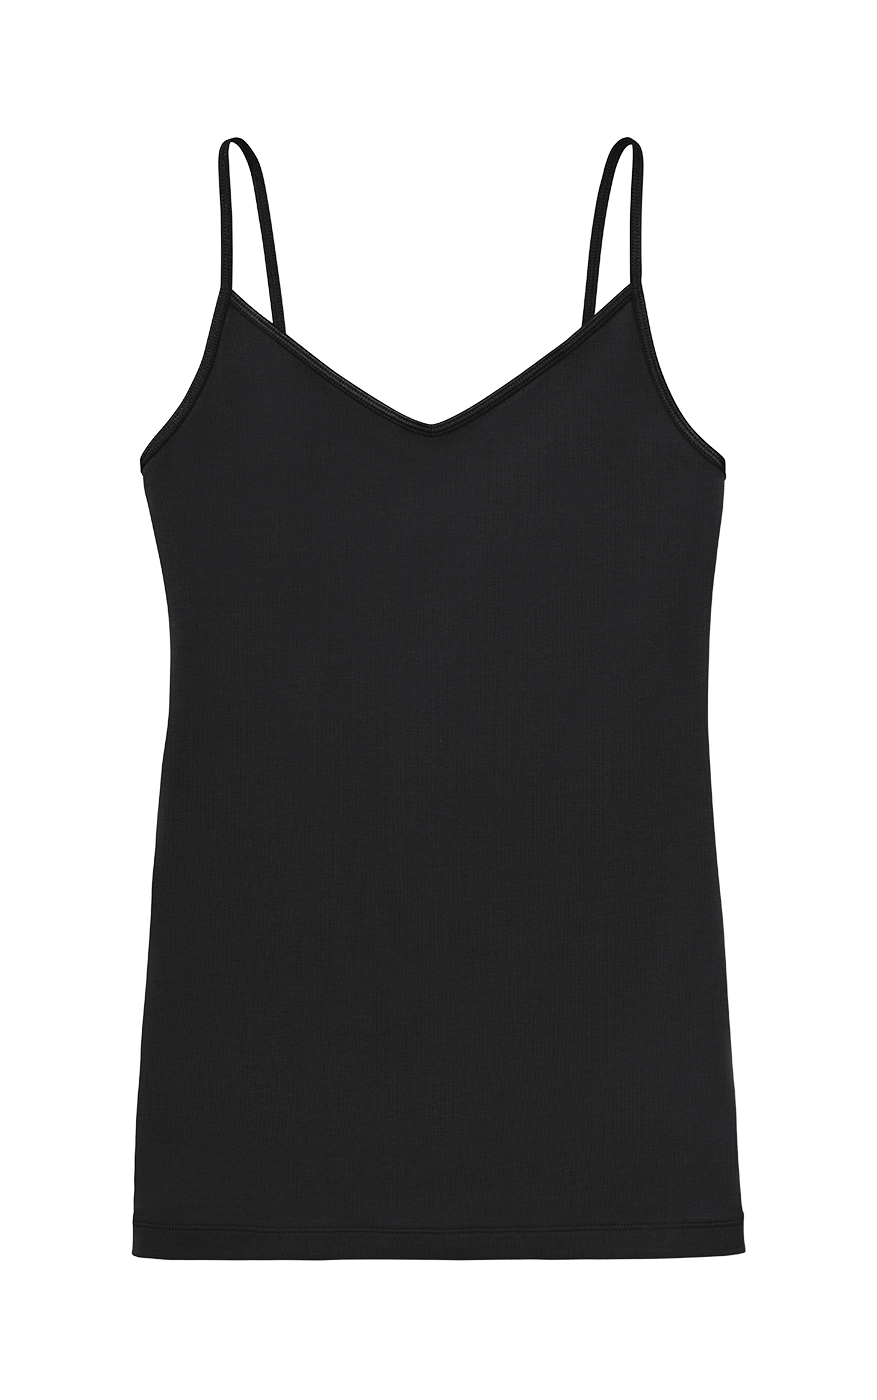 V-neck Camisole in colour black from the Cotton Seamless